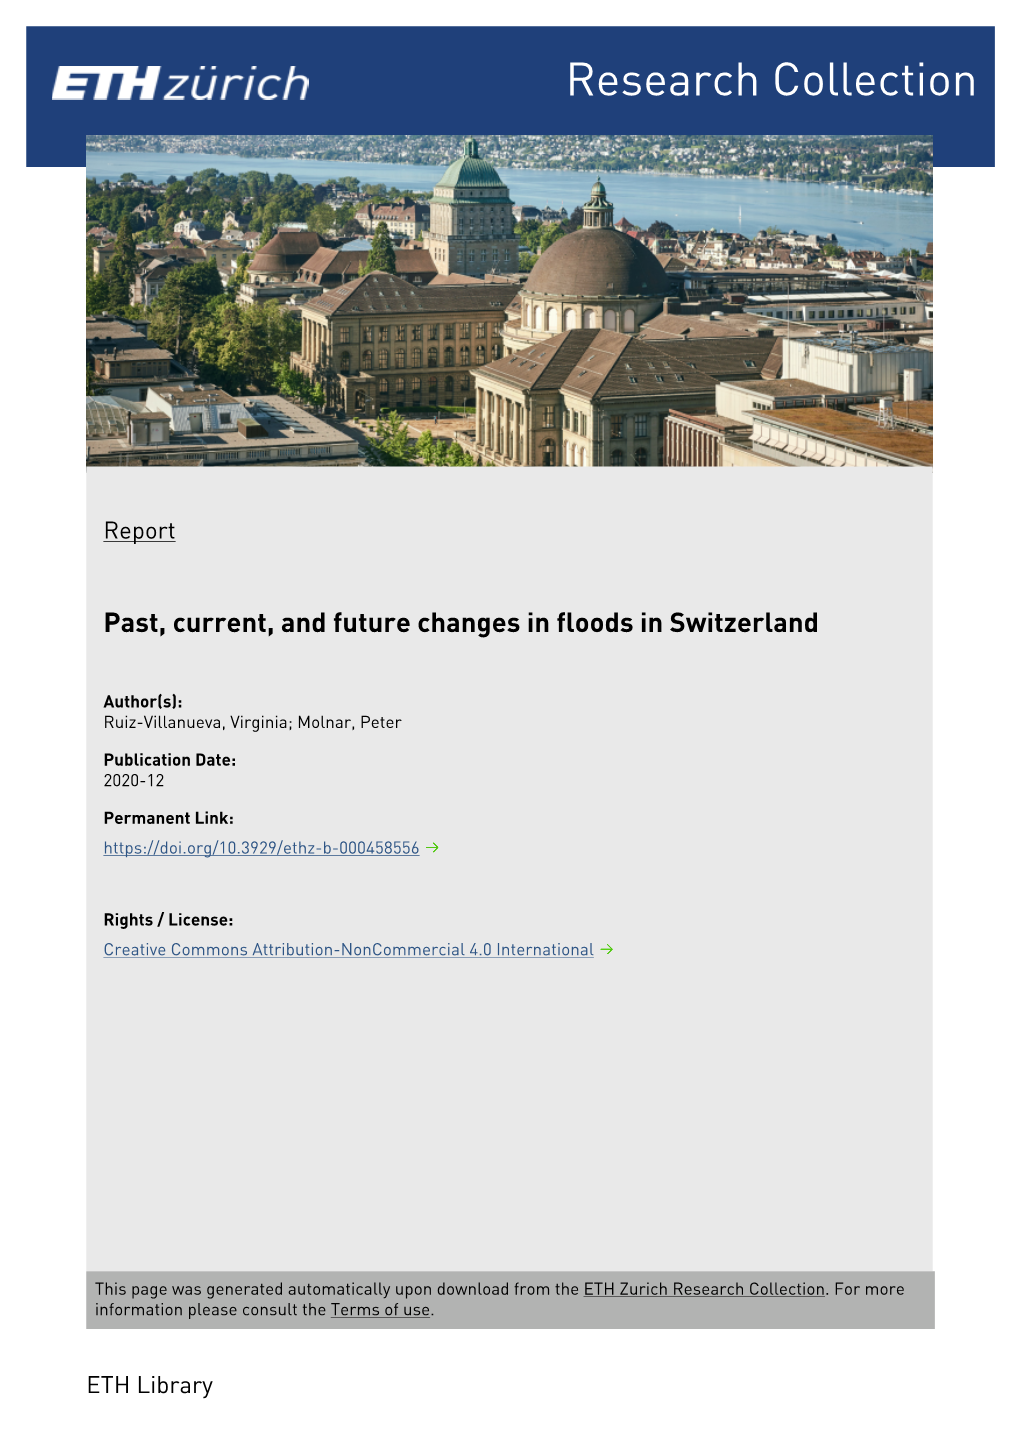 Past, Current, and Future Changes in Floods in Switzerland